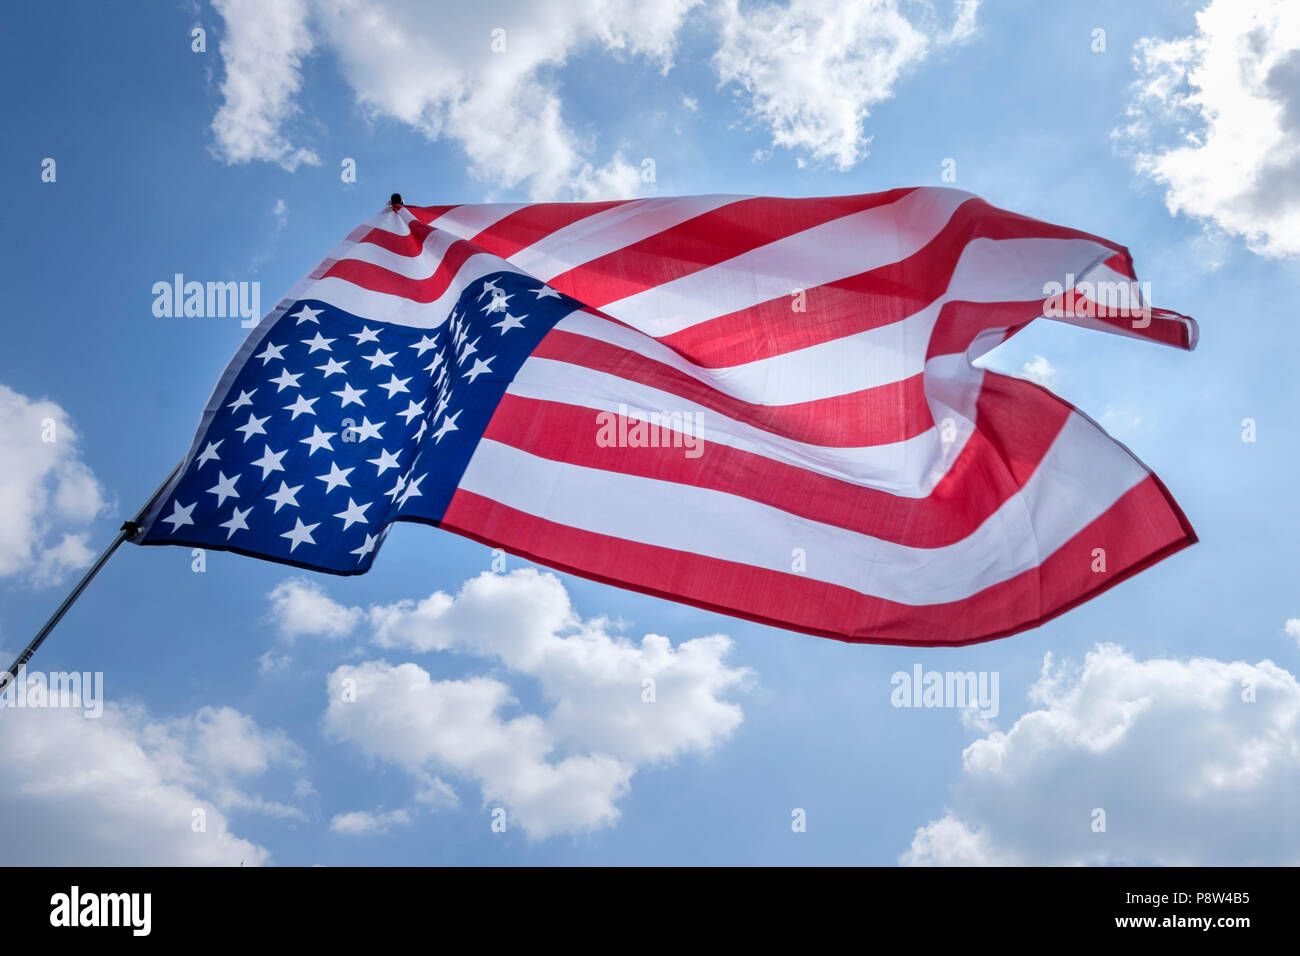 London, UK. 13th July 2018. Tens of thousands of people took to the streets of central London to protest against US President Donald Trump's visit to the UK. Pictured: An inverted Stars and Stripes flag waves in the sky. Credit: mark phillips/Alamy Live News Stock Photo